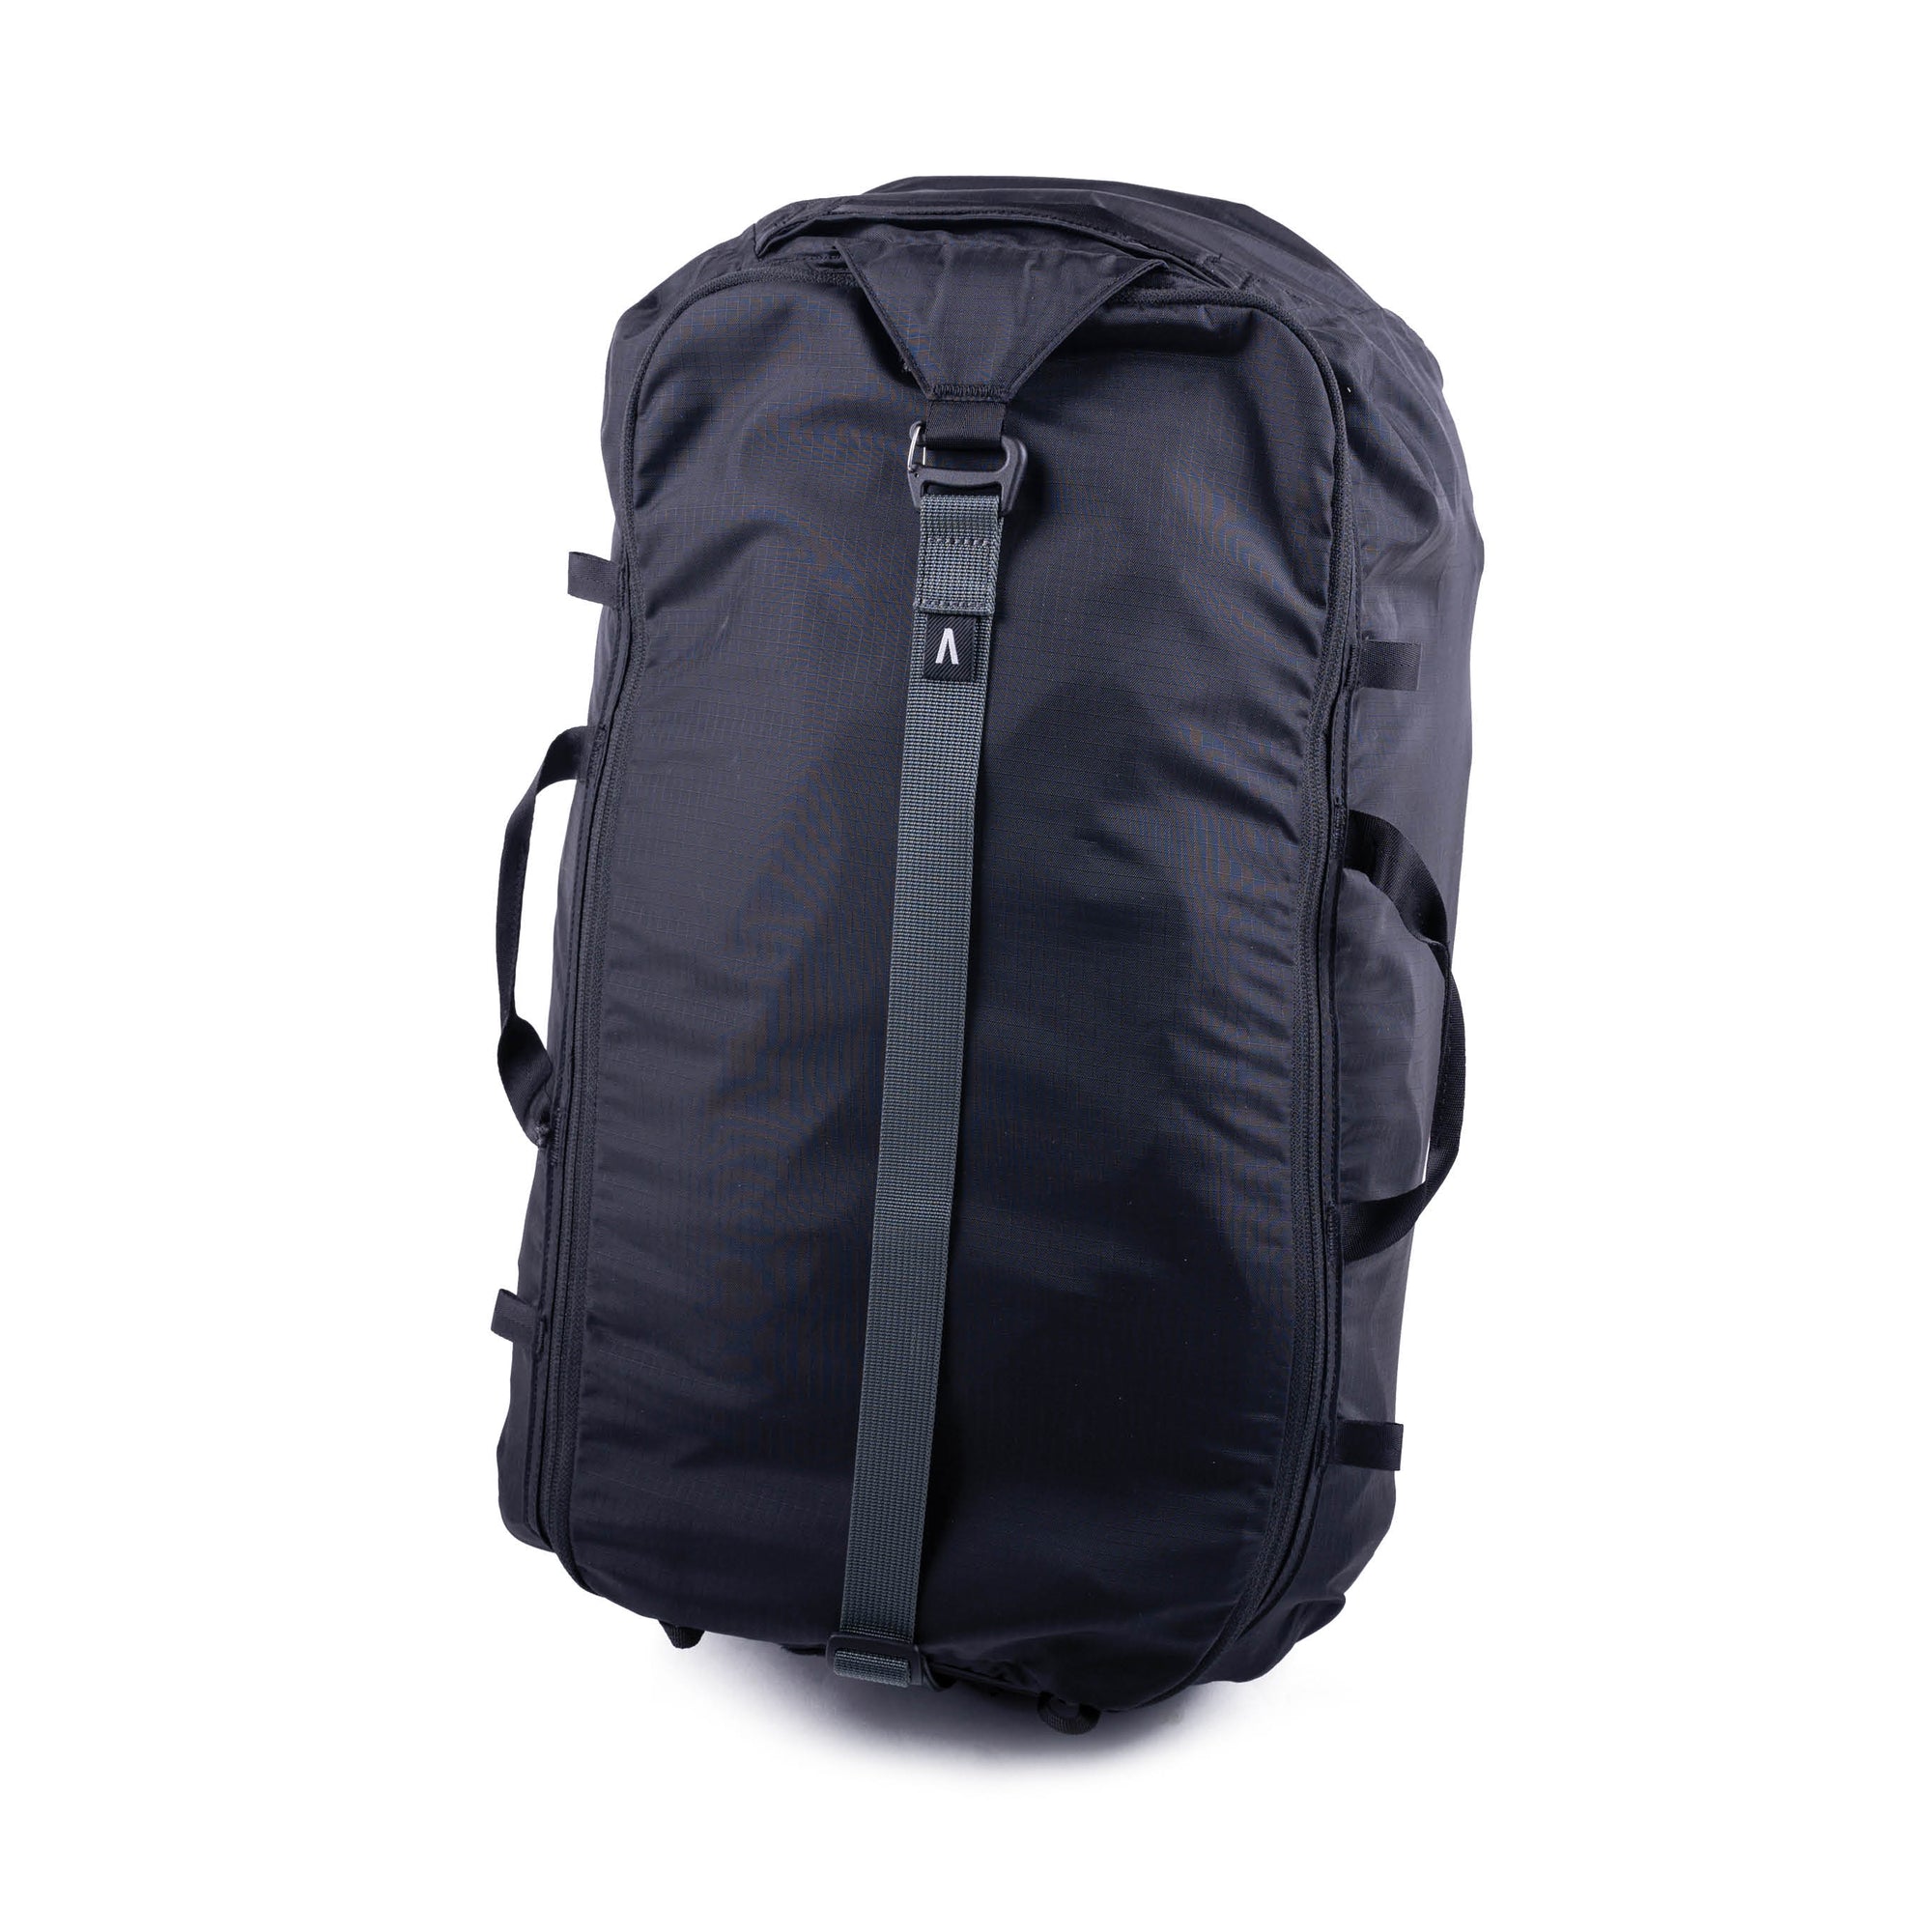 Please help! Looking for a similar backpack with black base like